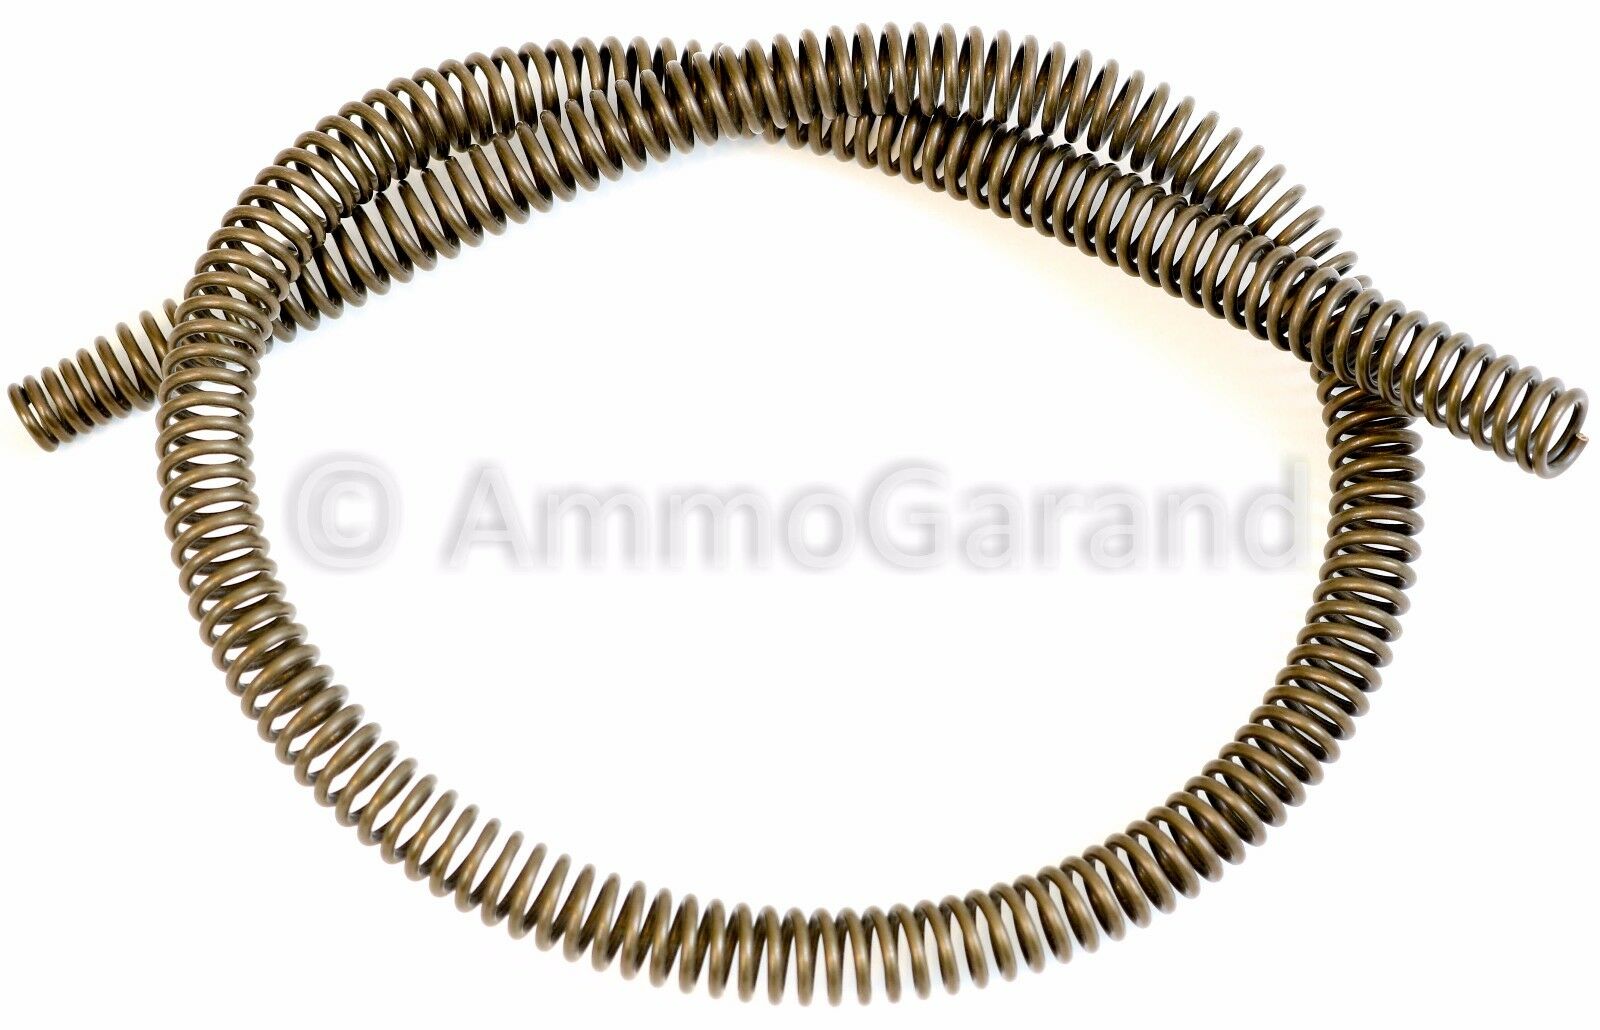 (1) Operating Rod Spring For M1 Garand Op Rod - New Us Made Parts Oprod Spring